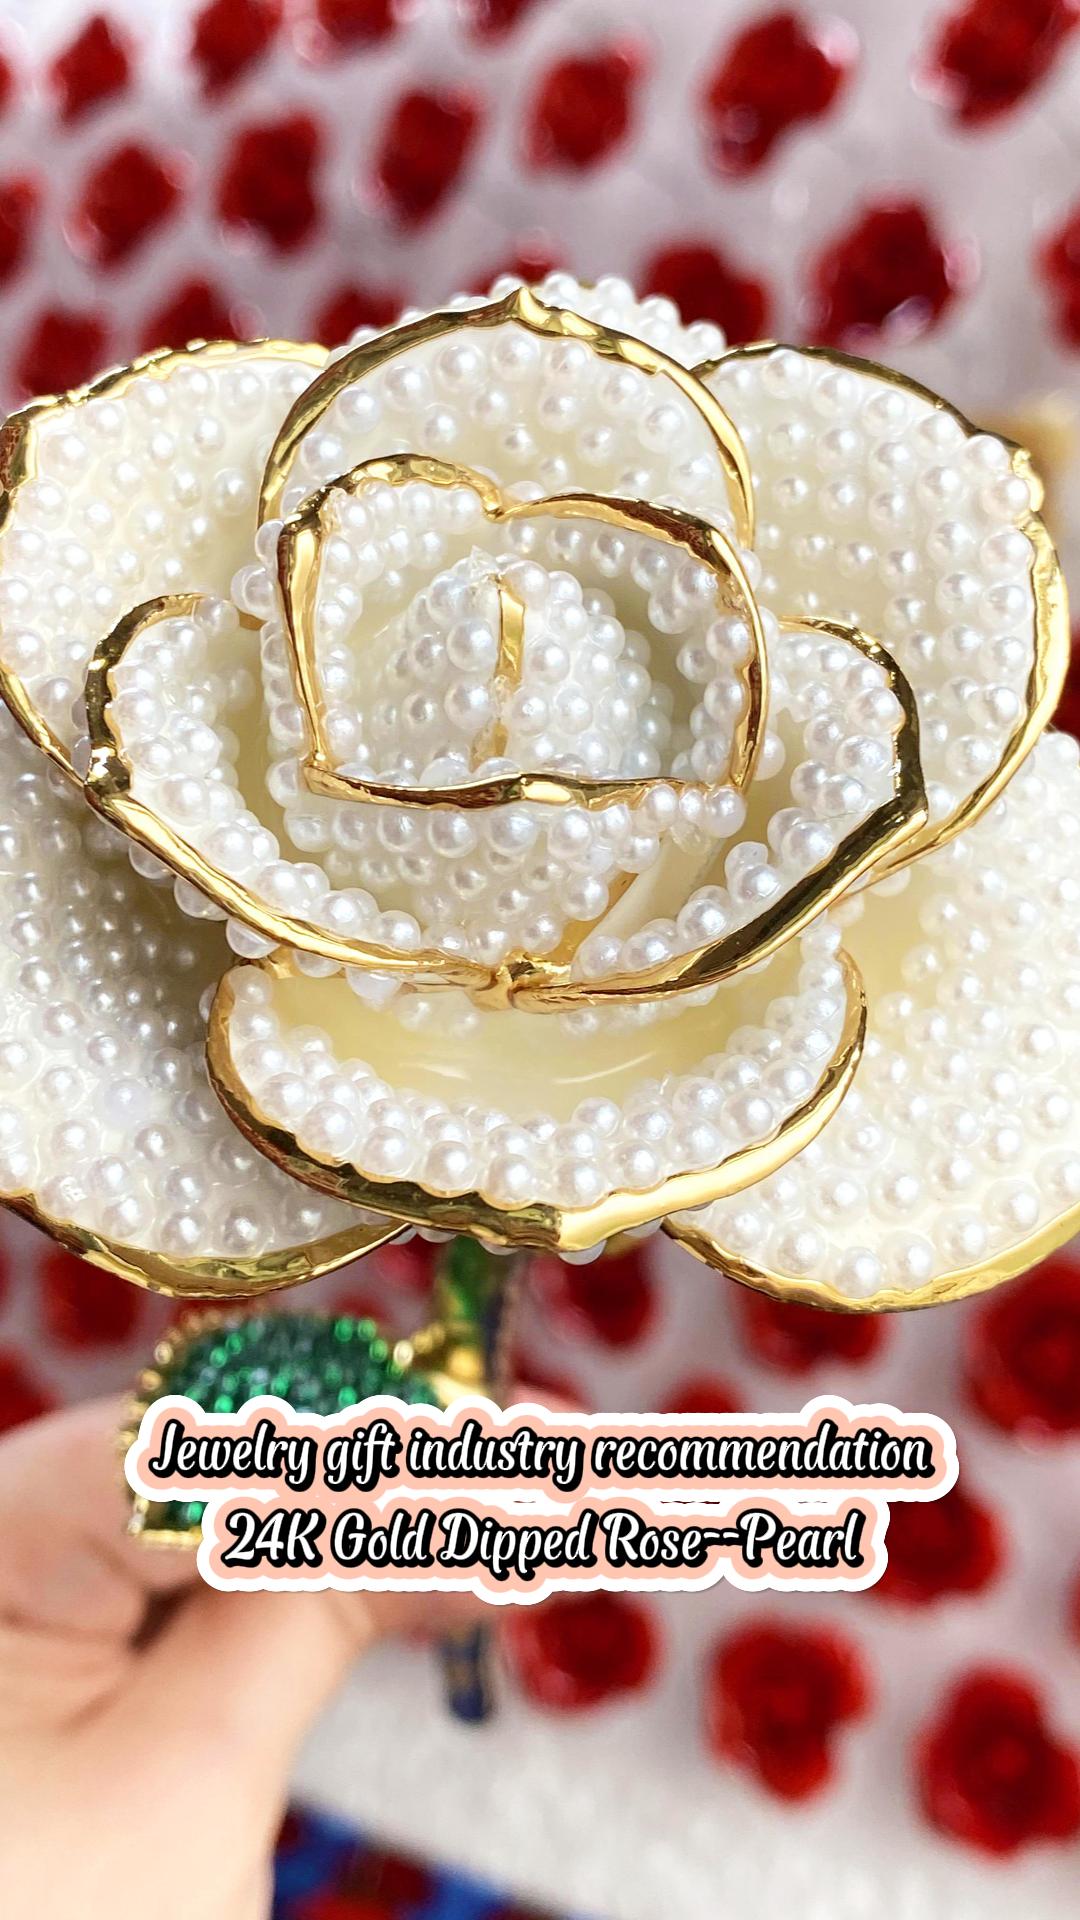 Absolutely Beautiful Fusion! A new product recommendation in the jewelry and gift industry: a perfect blend of 24K gold dipped roses and white pearls for the perfect gift of timeless splendor